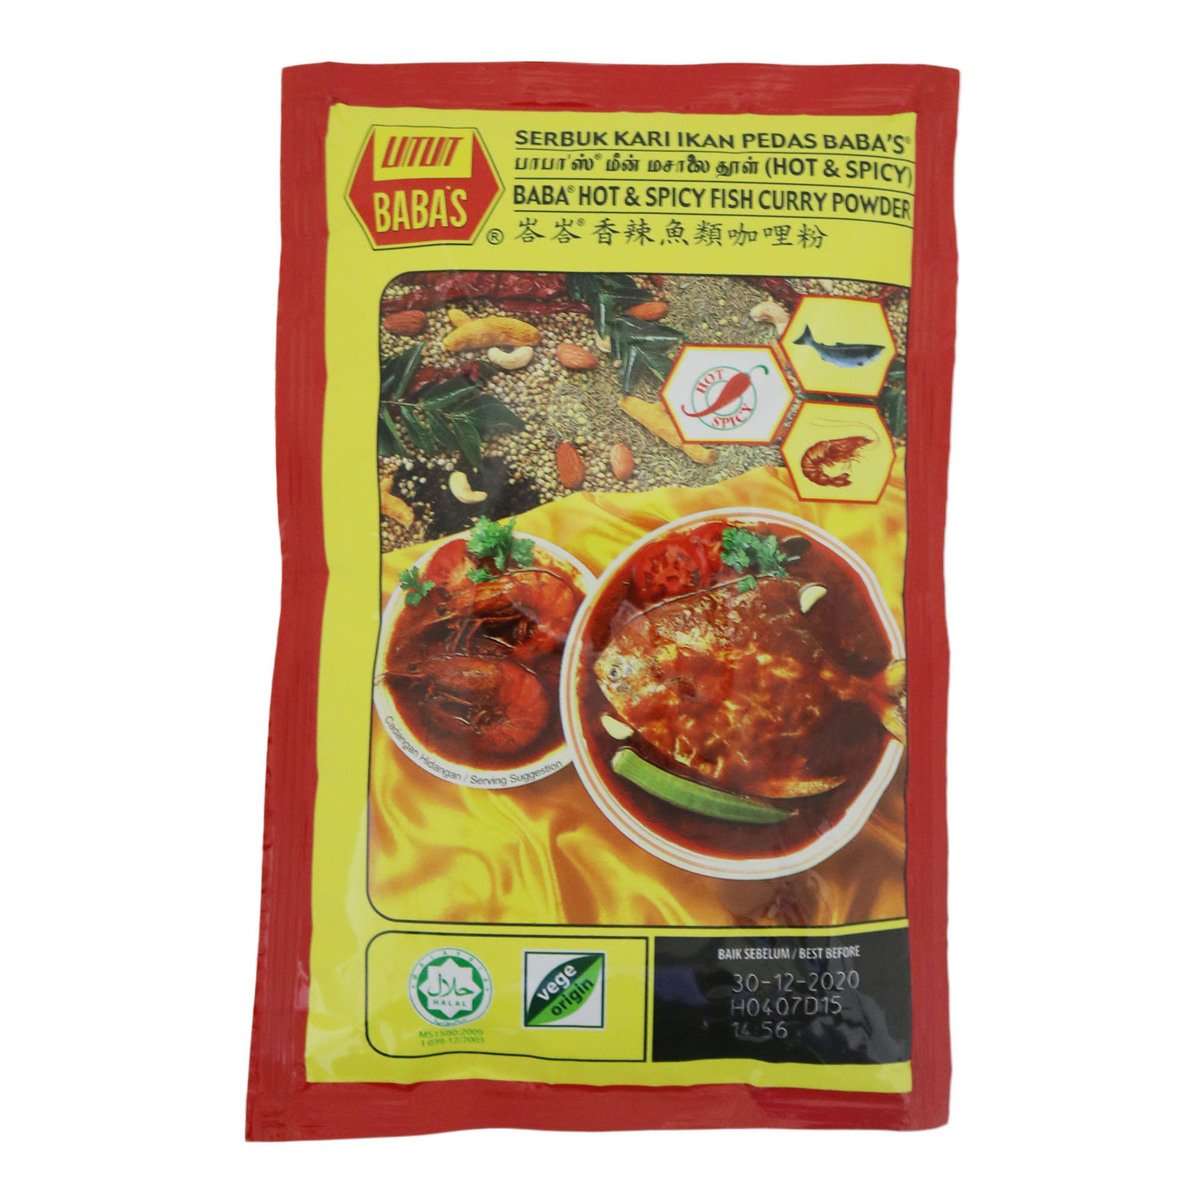 Babas Hot & Spicy Fish Curry Powder 125g